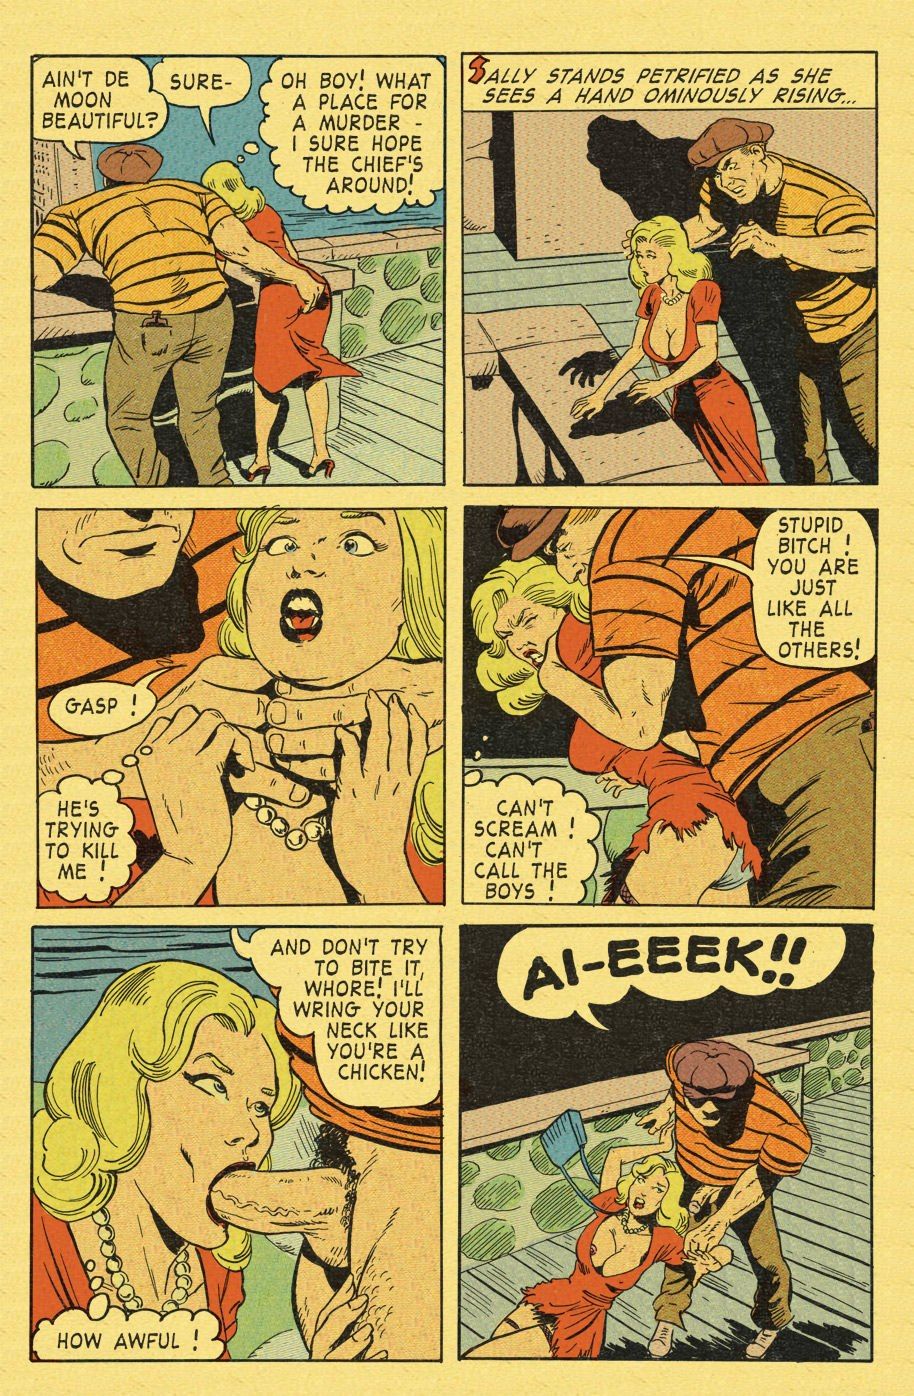 Crime Smashers Part 1 The Wertham Files page 8